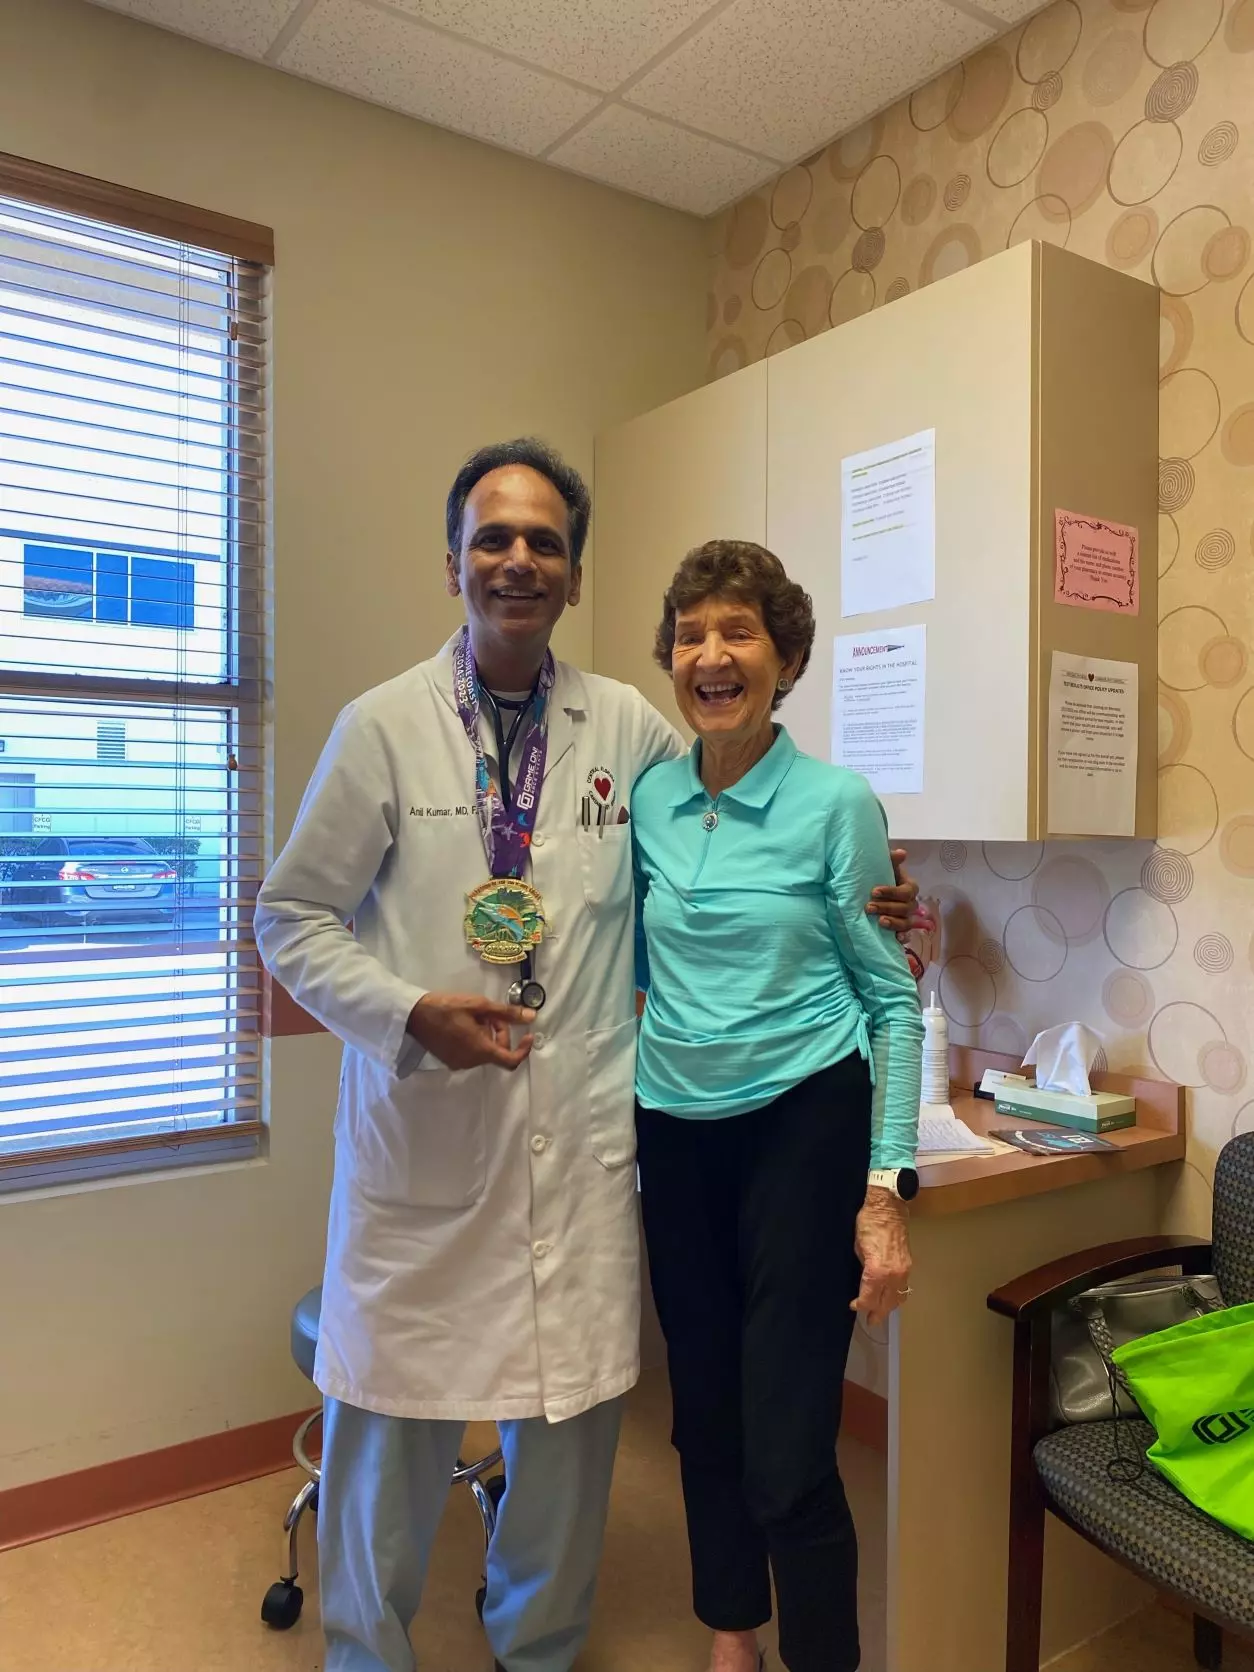 87-year-old marathoner honors Dr. Kumar with race medal. 